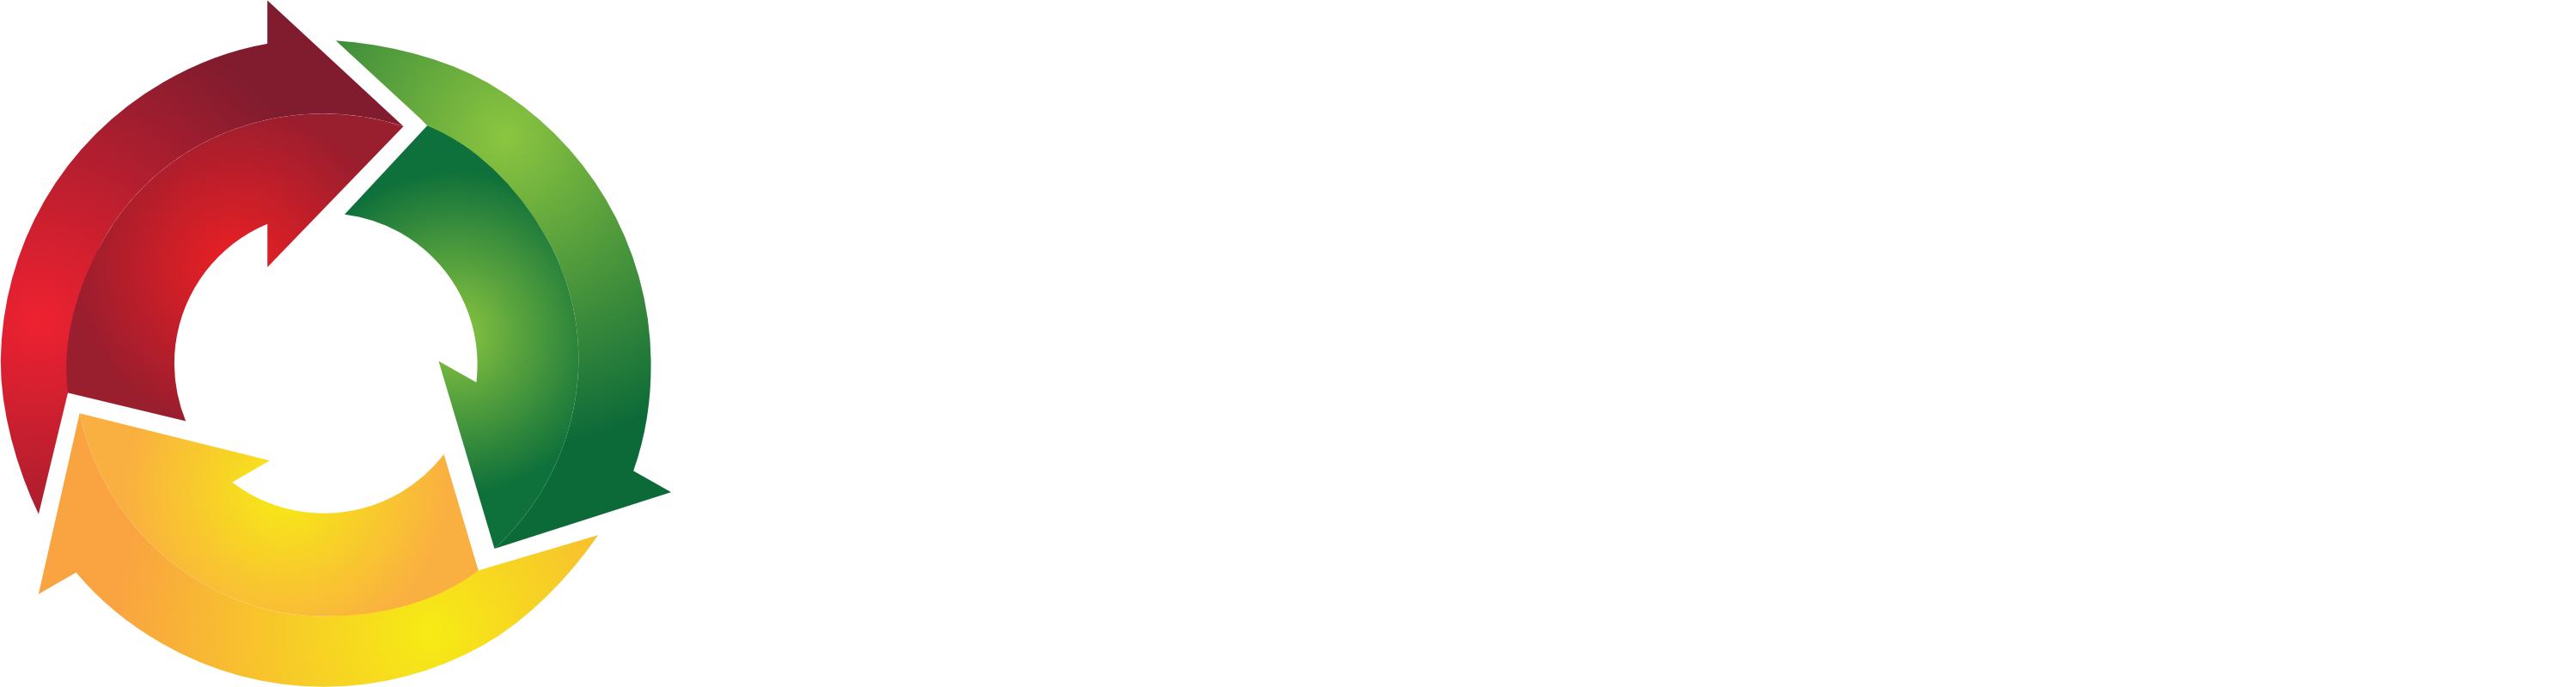 DATS | Digital Action Tracking System by ASM